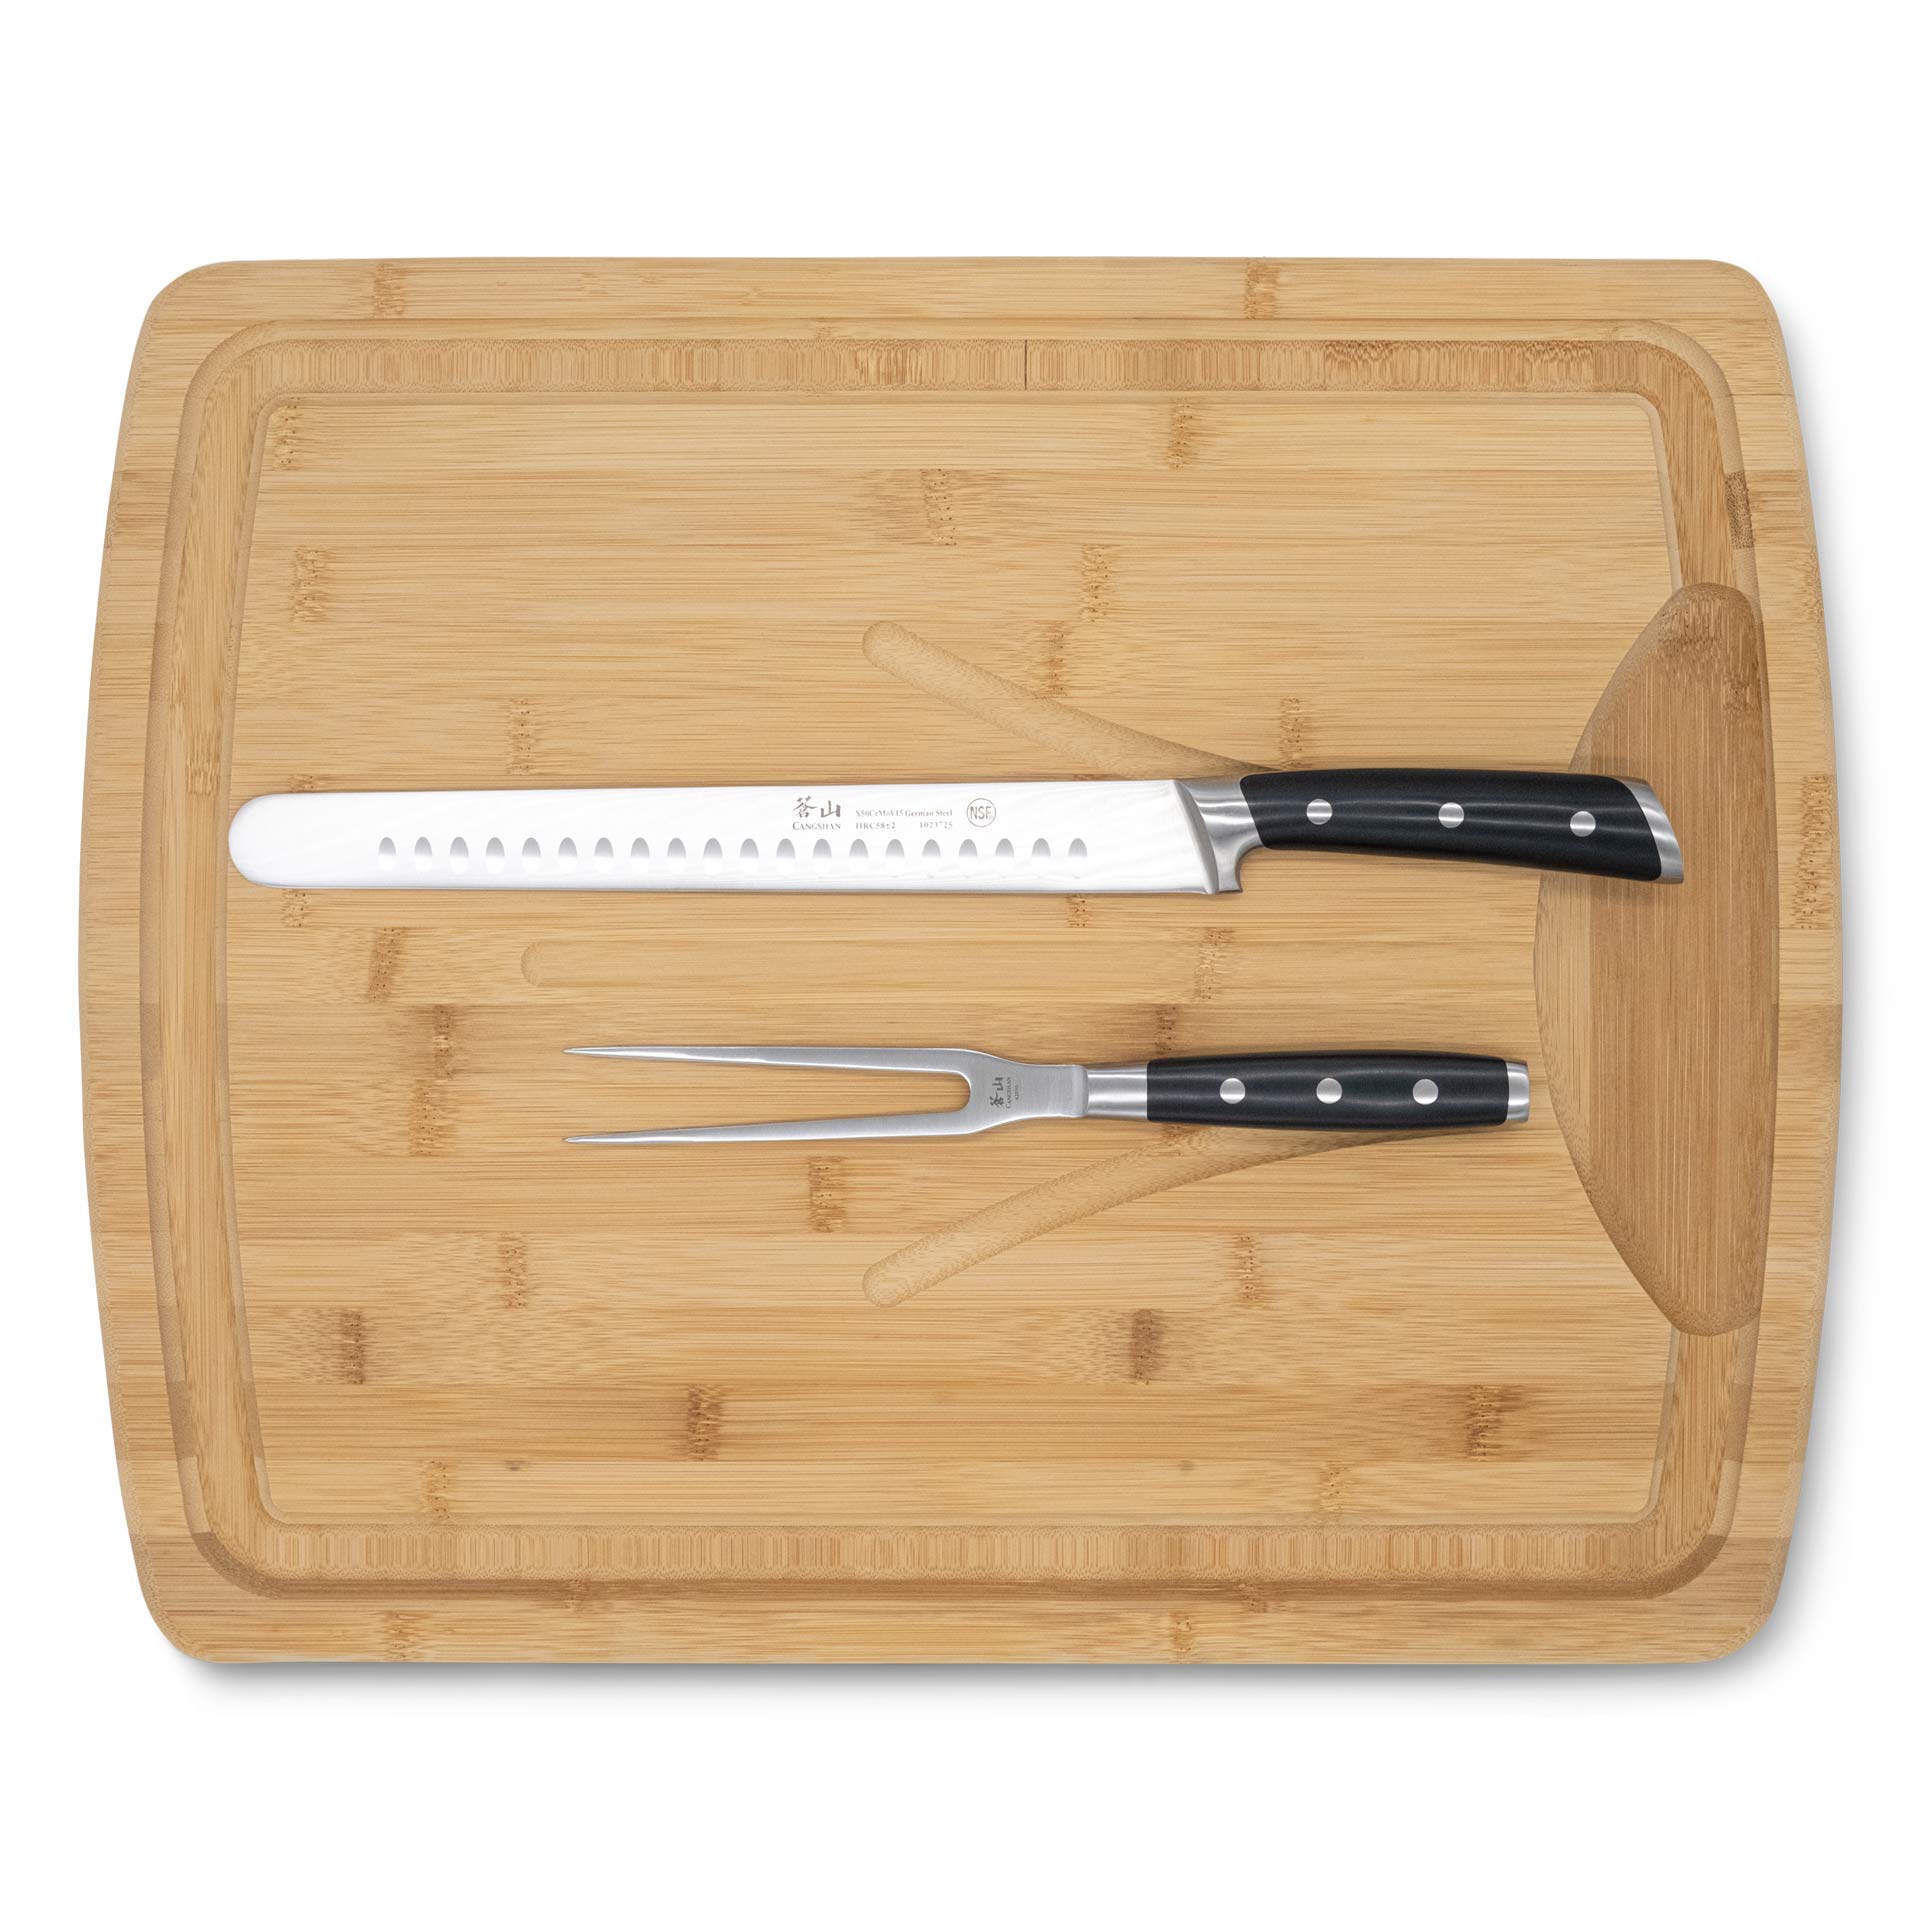 ATBBQ Essentials Carving Board Kit 12043025